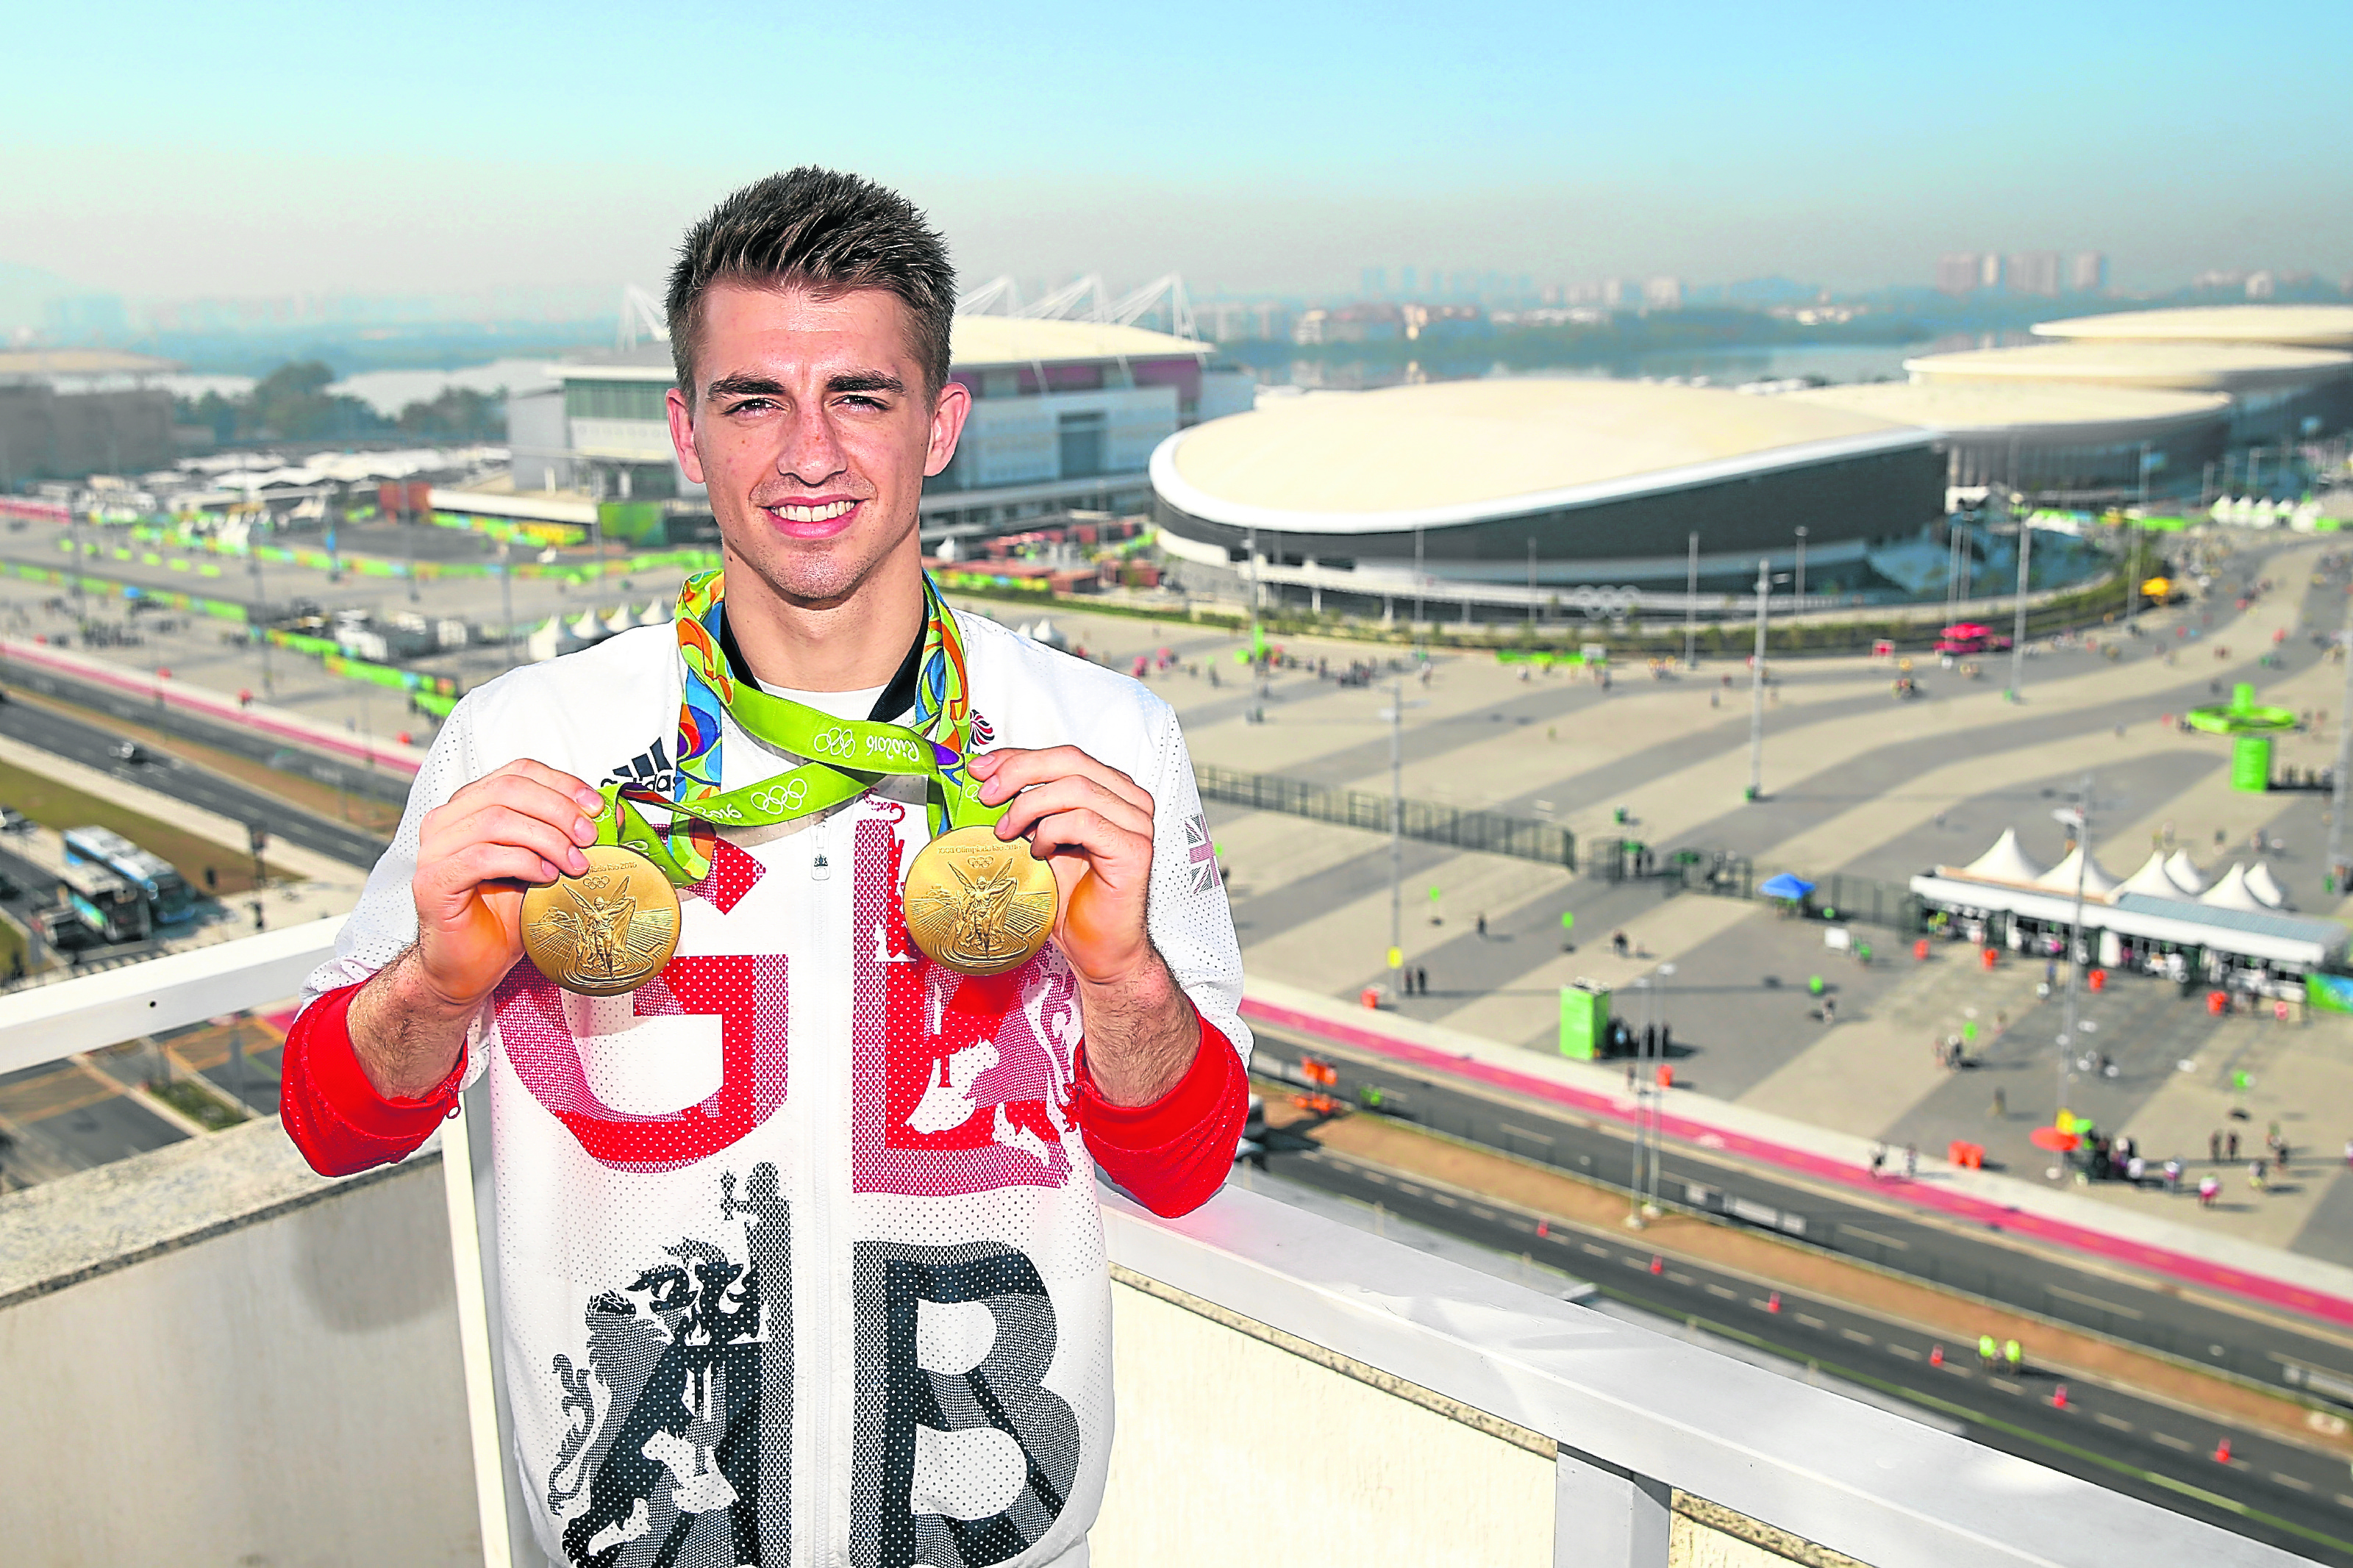 Max Whitlock of Great Britain poses for photographs with his two gold medals in front of the Olympic Park (Photo by Alex Livesey/Getty Images)